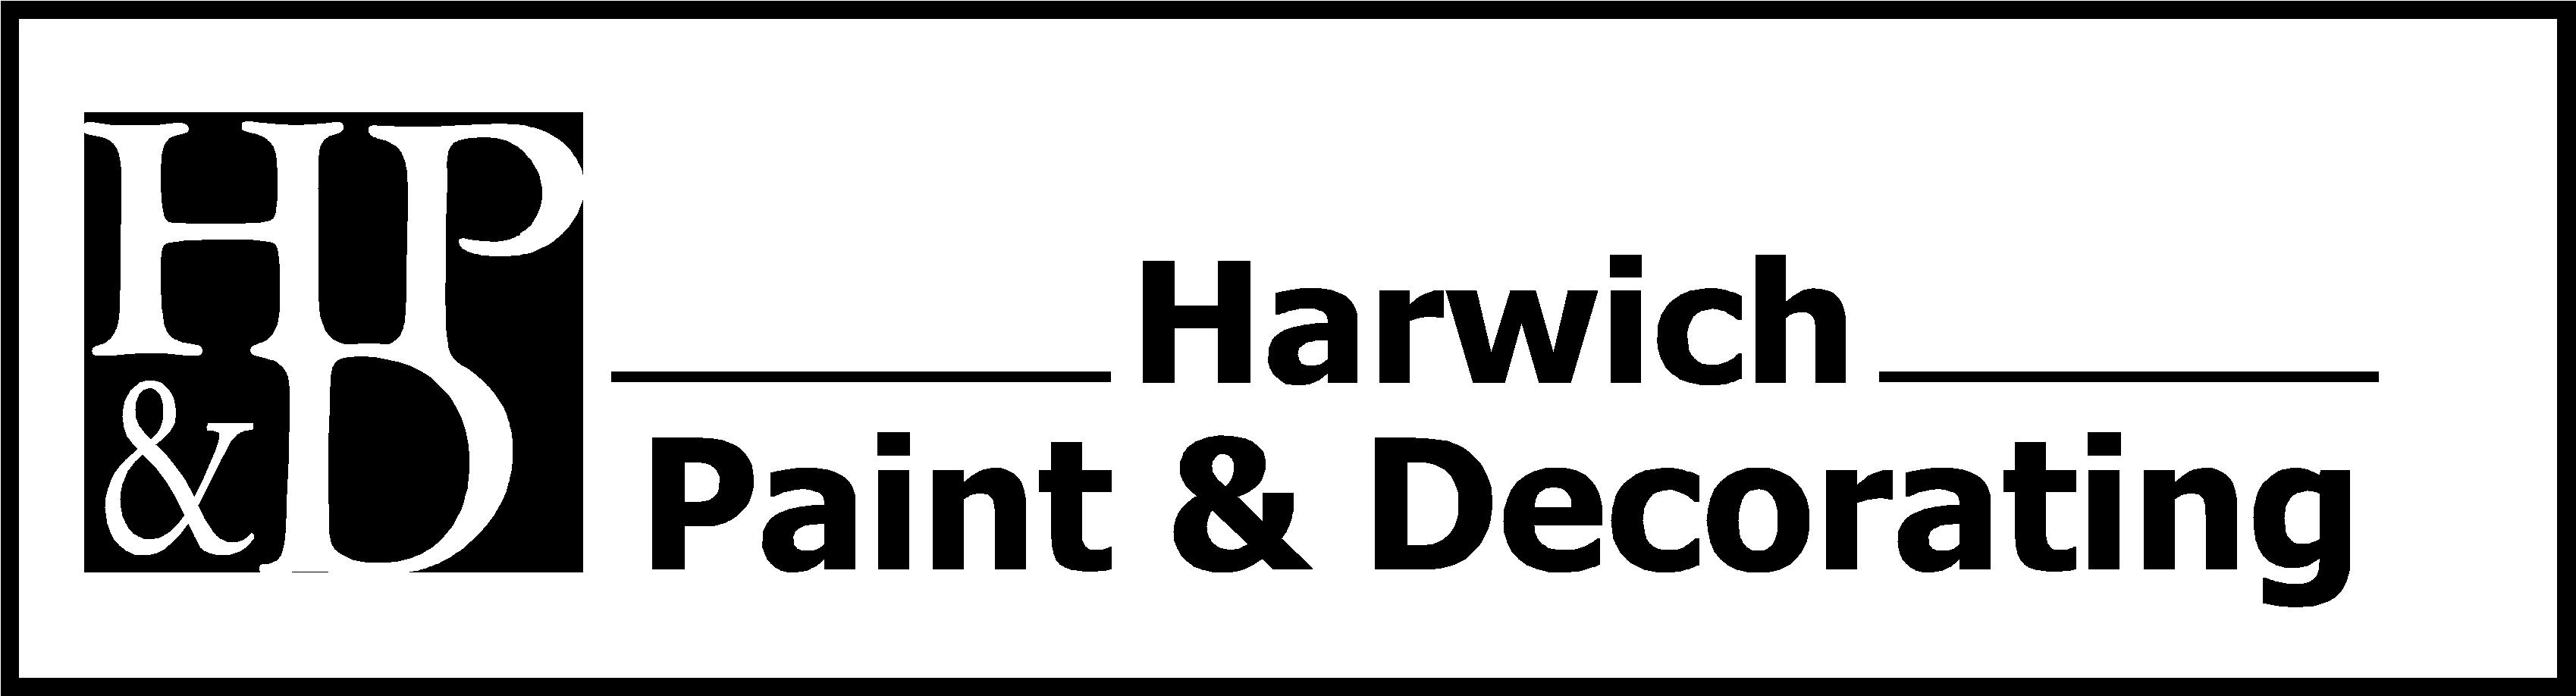 Harwich Paint and Decorating